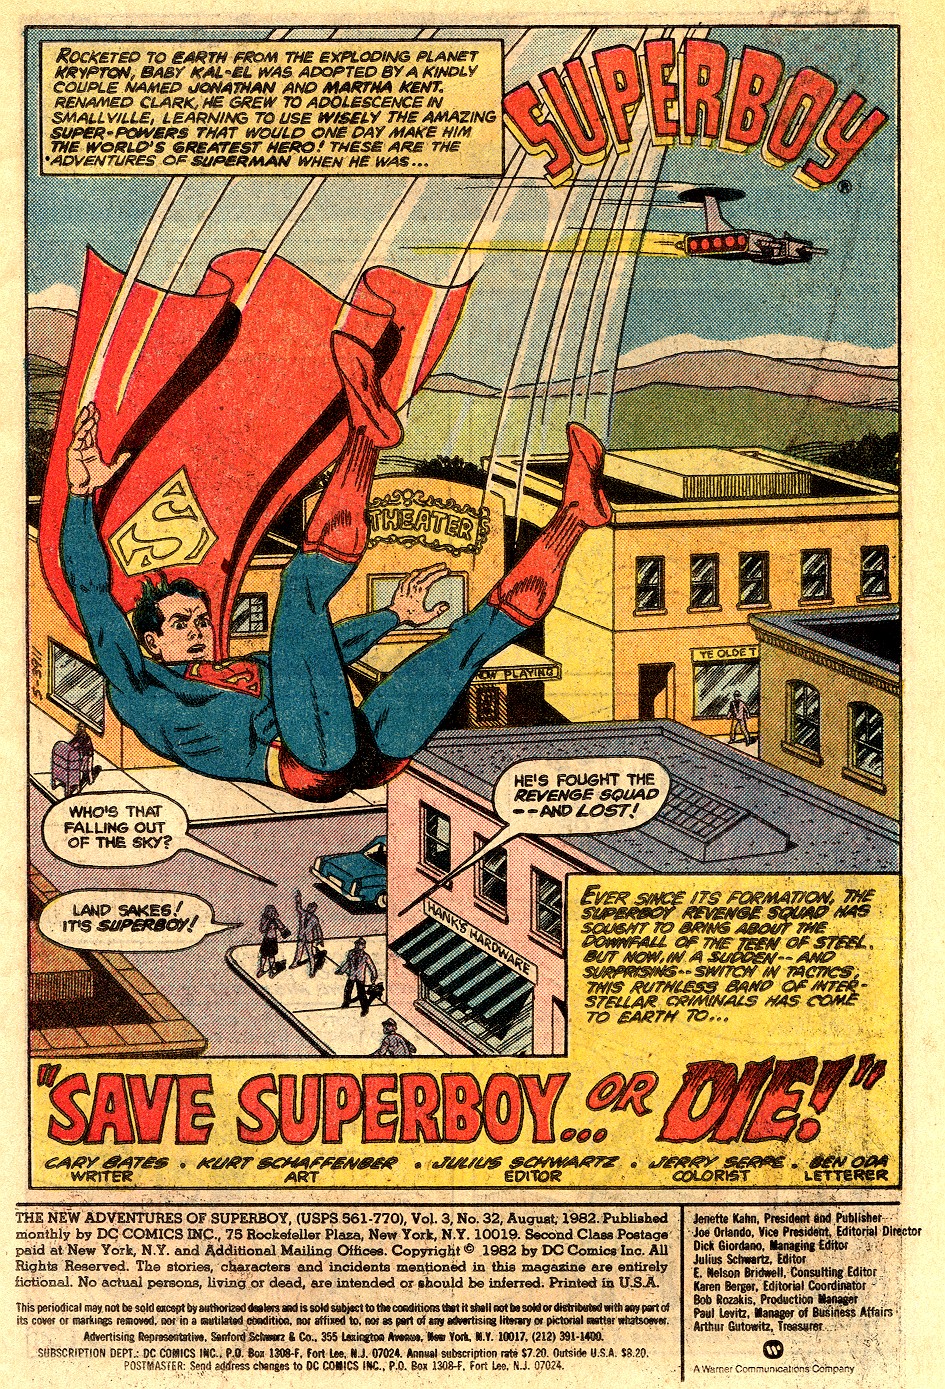 The New Adventures of Superboy 32 Page 2